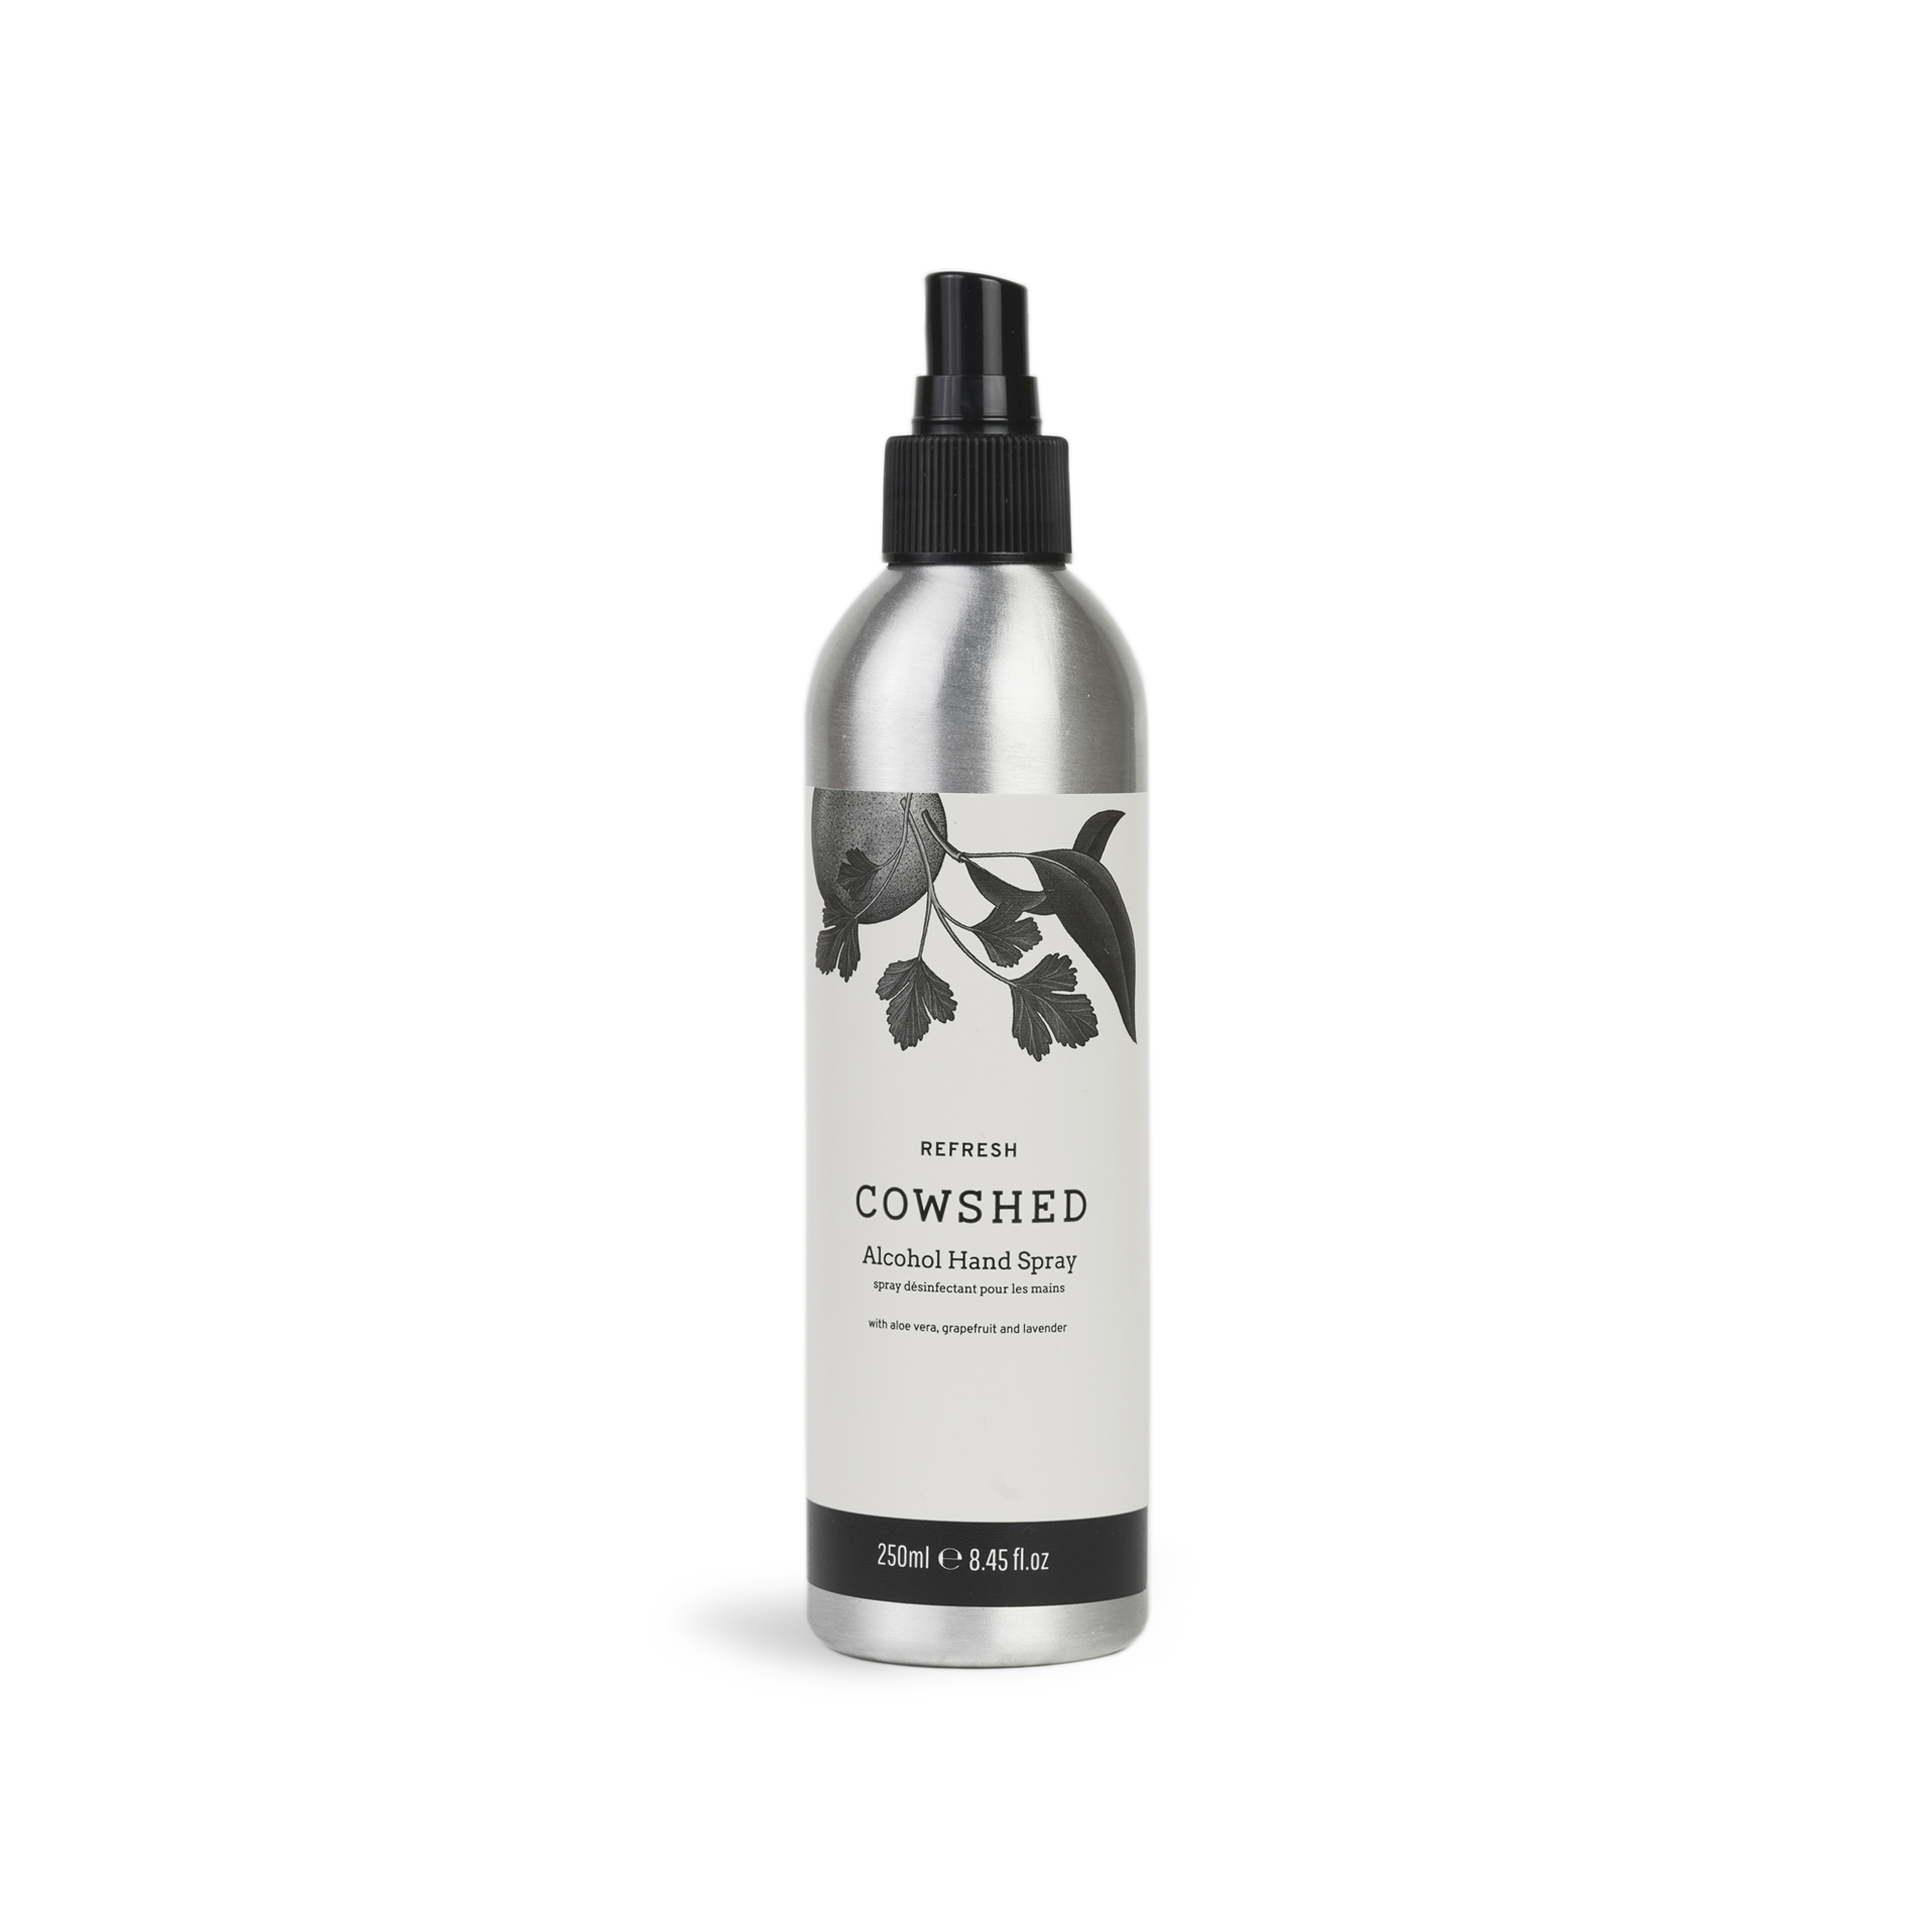 Cowshed REFRESH Hand Spray 250ml